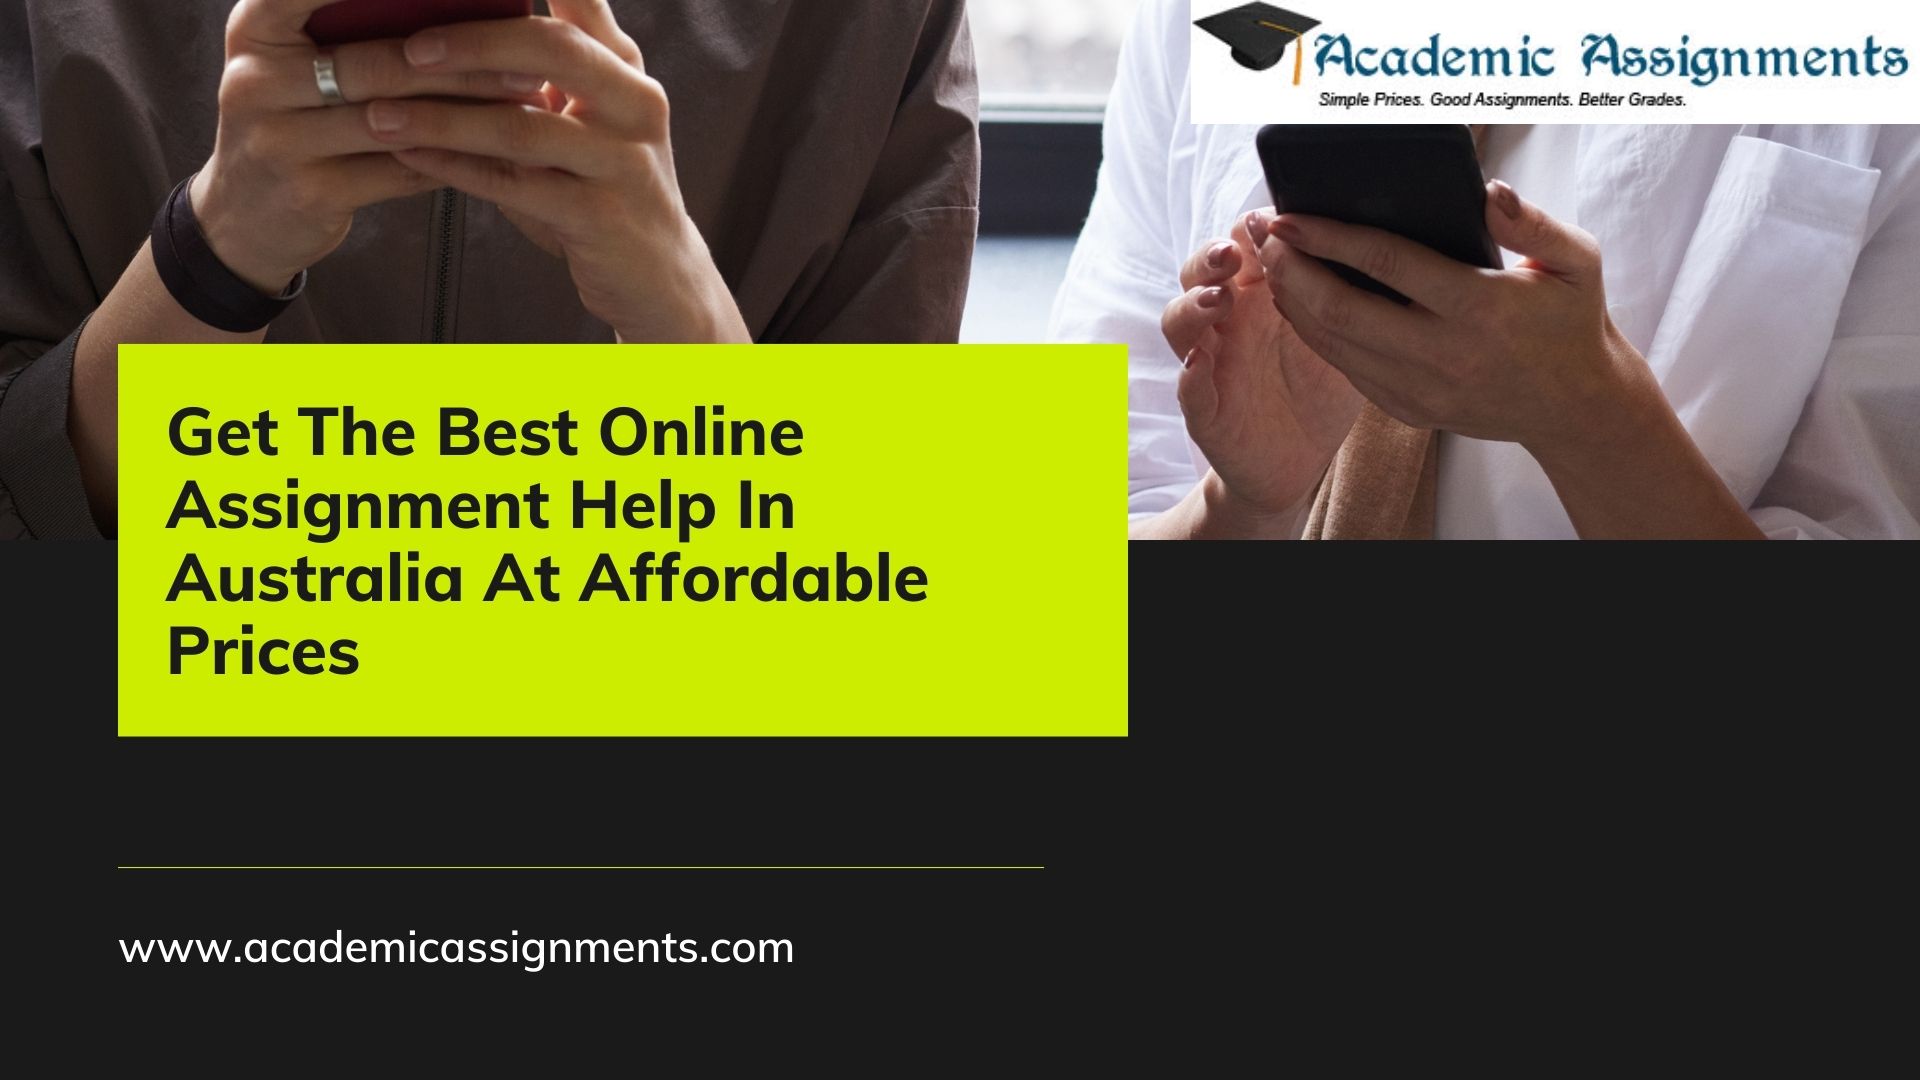 Get The Best Online Assignment Help In Australia At Affordable Prices